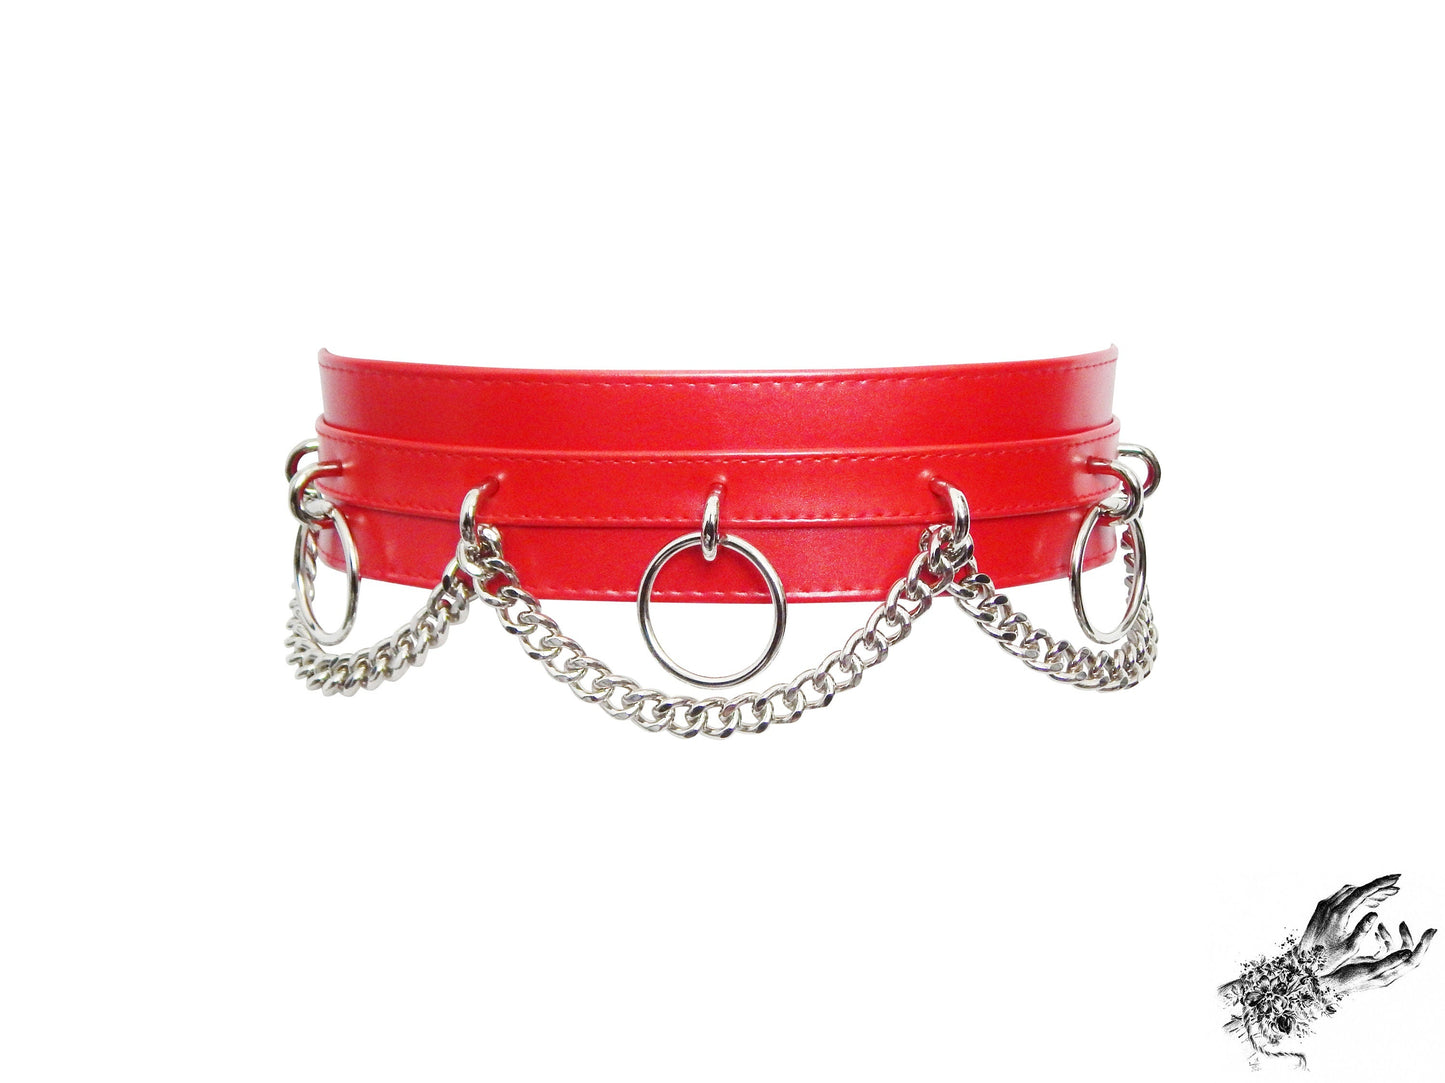 Red Vegan Leather O Ring and Chain Belt - SALE